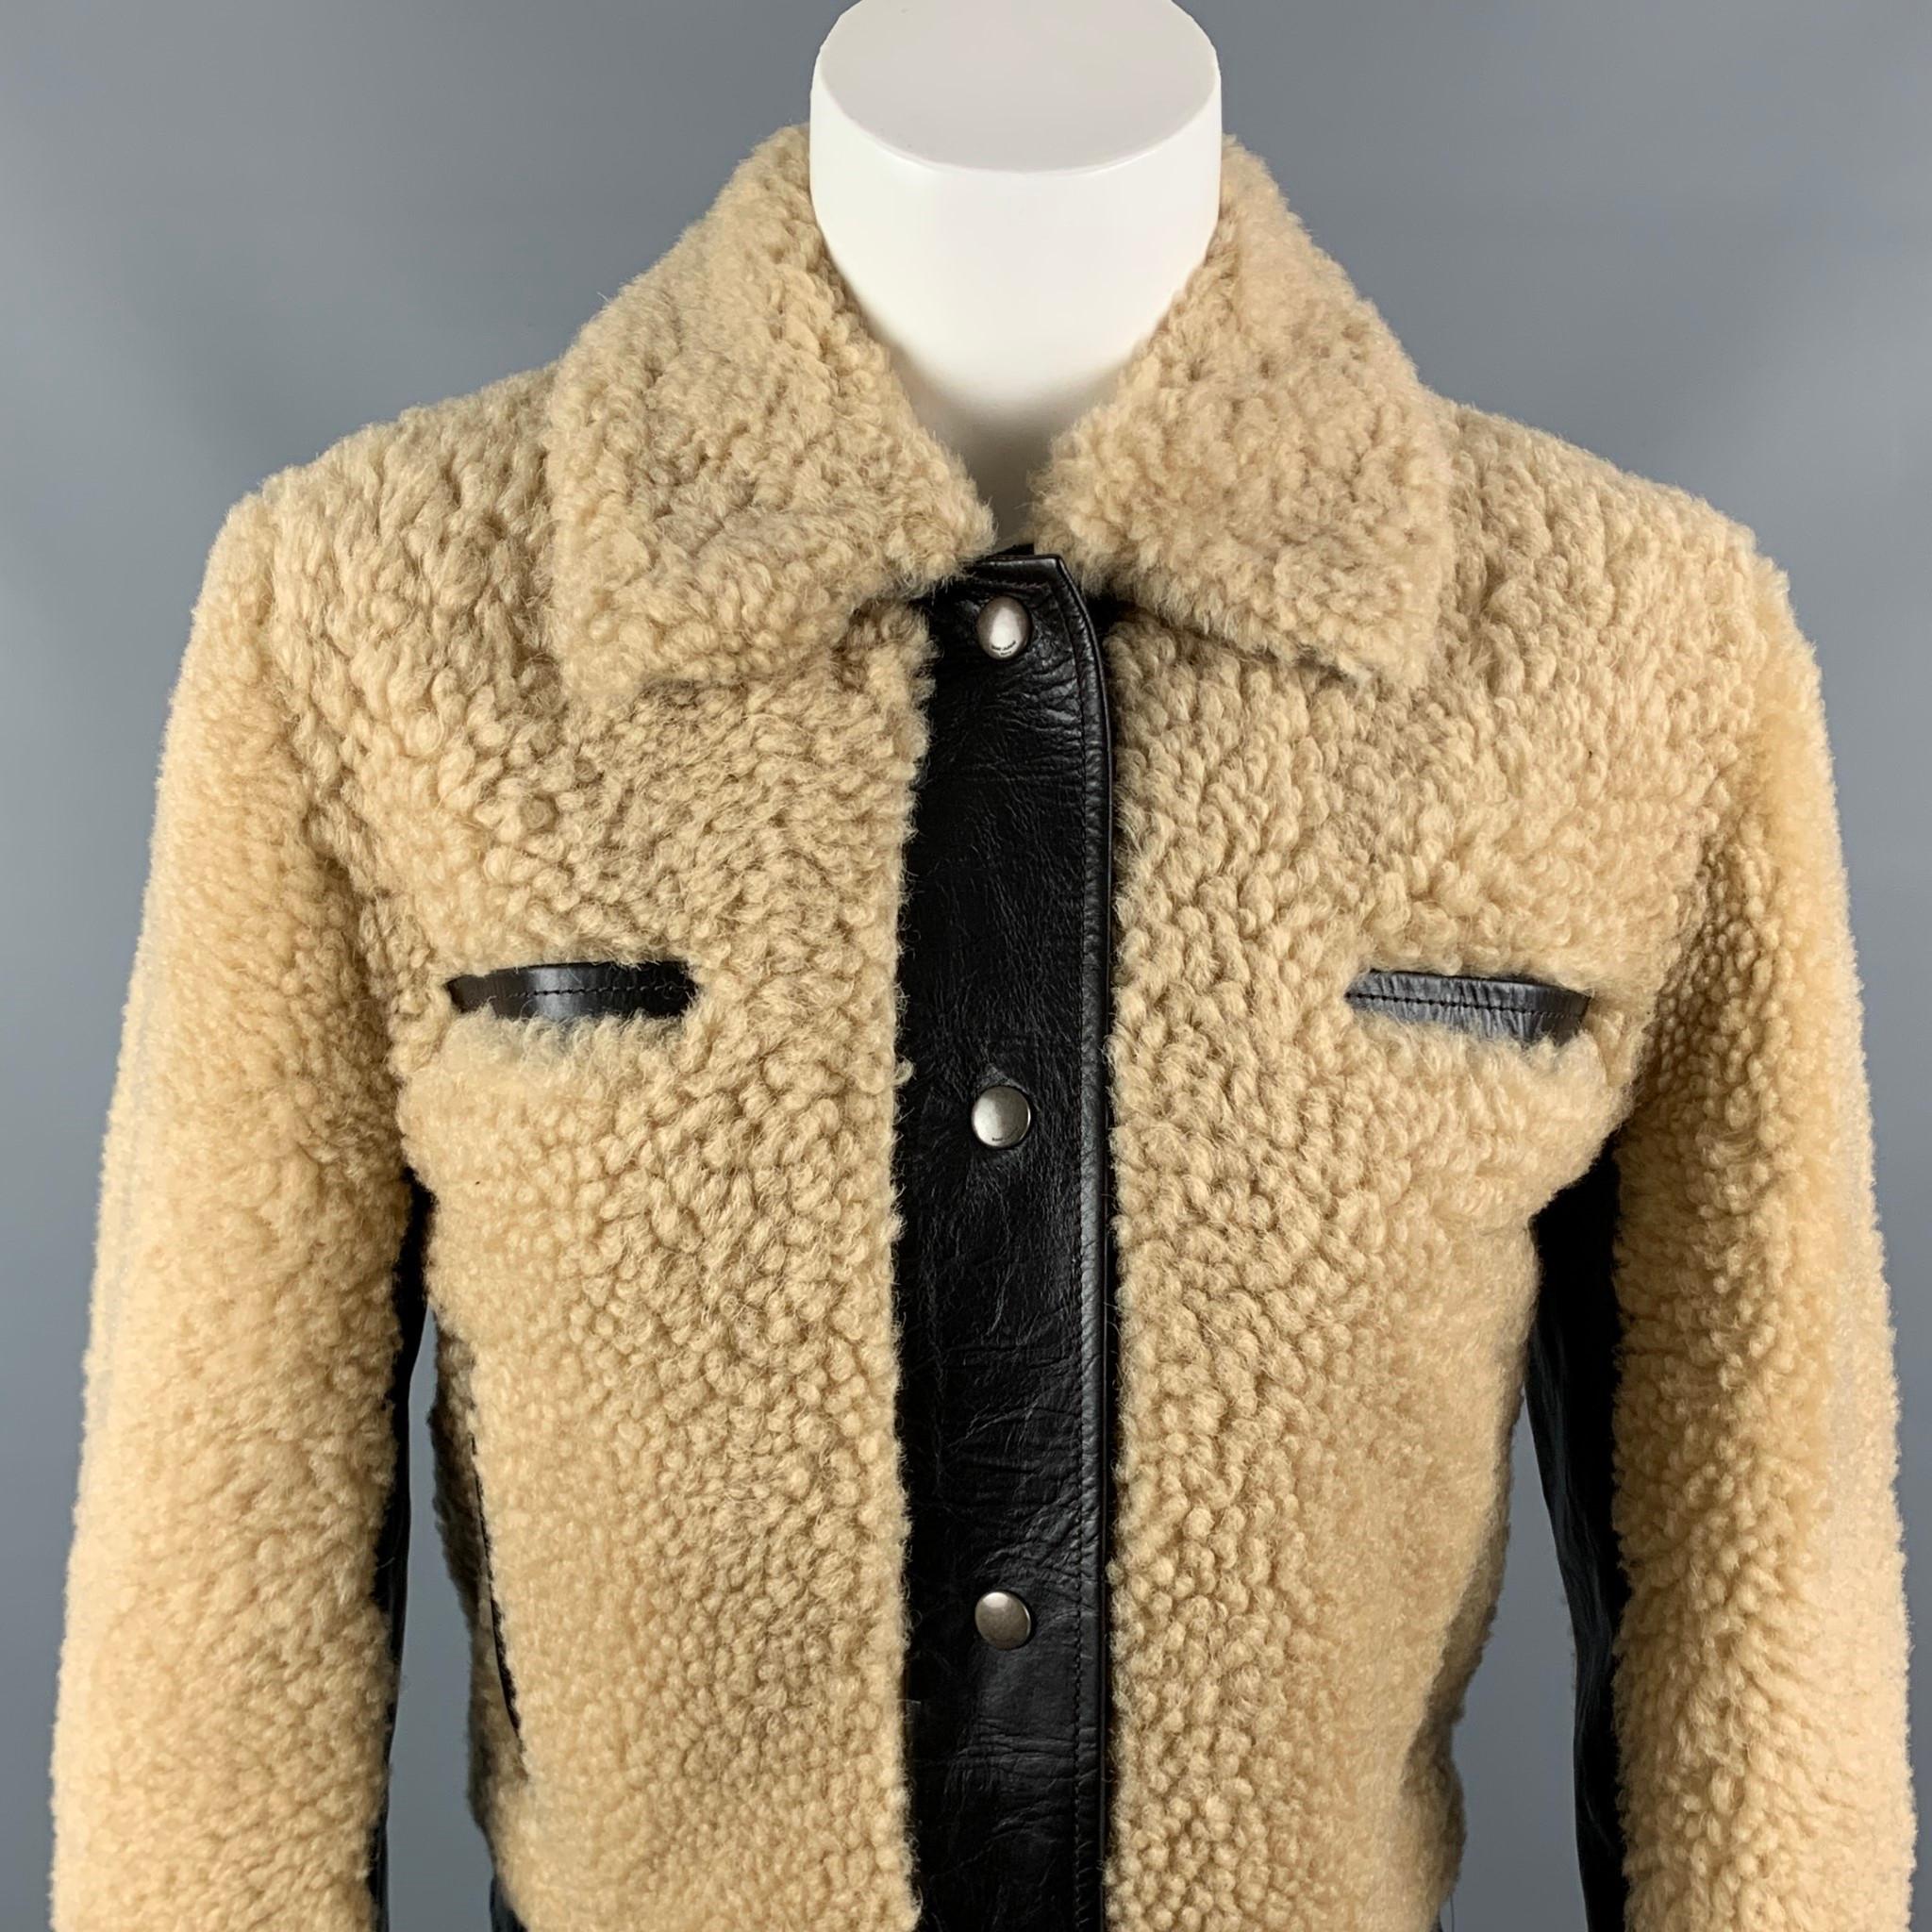 SAINT LAURENT Fall 21 short jacket comes in a tan shearling with a brown leather trim design featuring a wide pointed collar, snap button cuffs, four pockets, and a snap button closure. Made in Italy.

New Without Tags. 
Marked: F 34
Original Retail